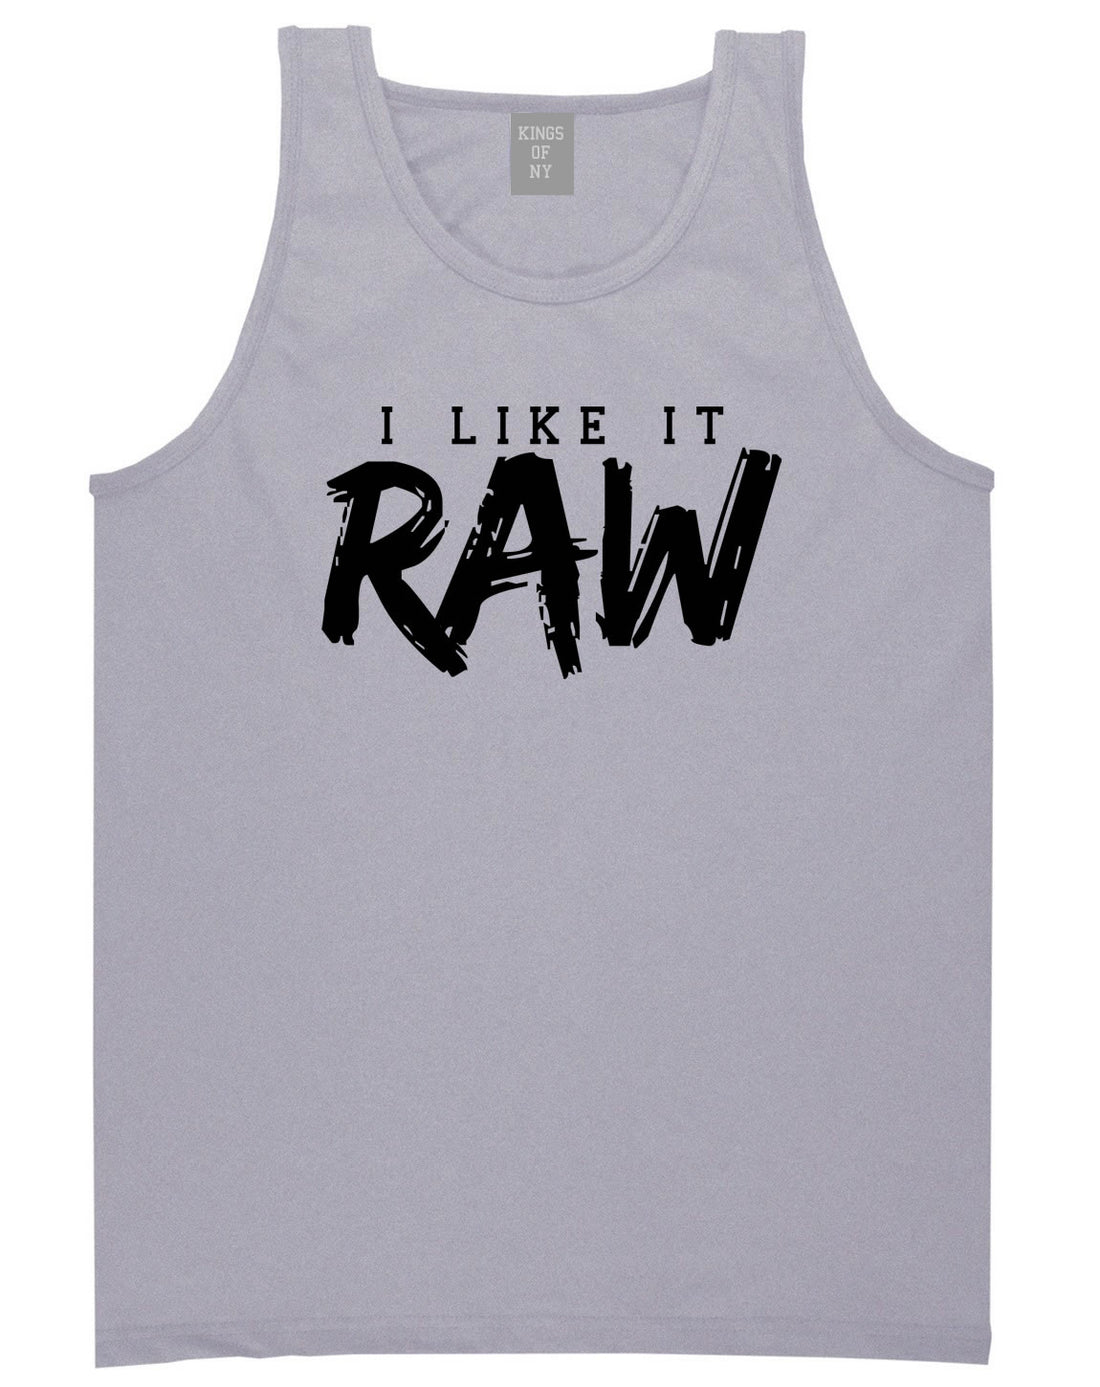 I Like It Raw Tank Top in Grey By Kings Of NY